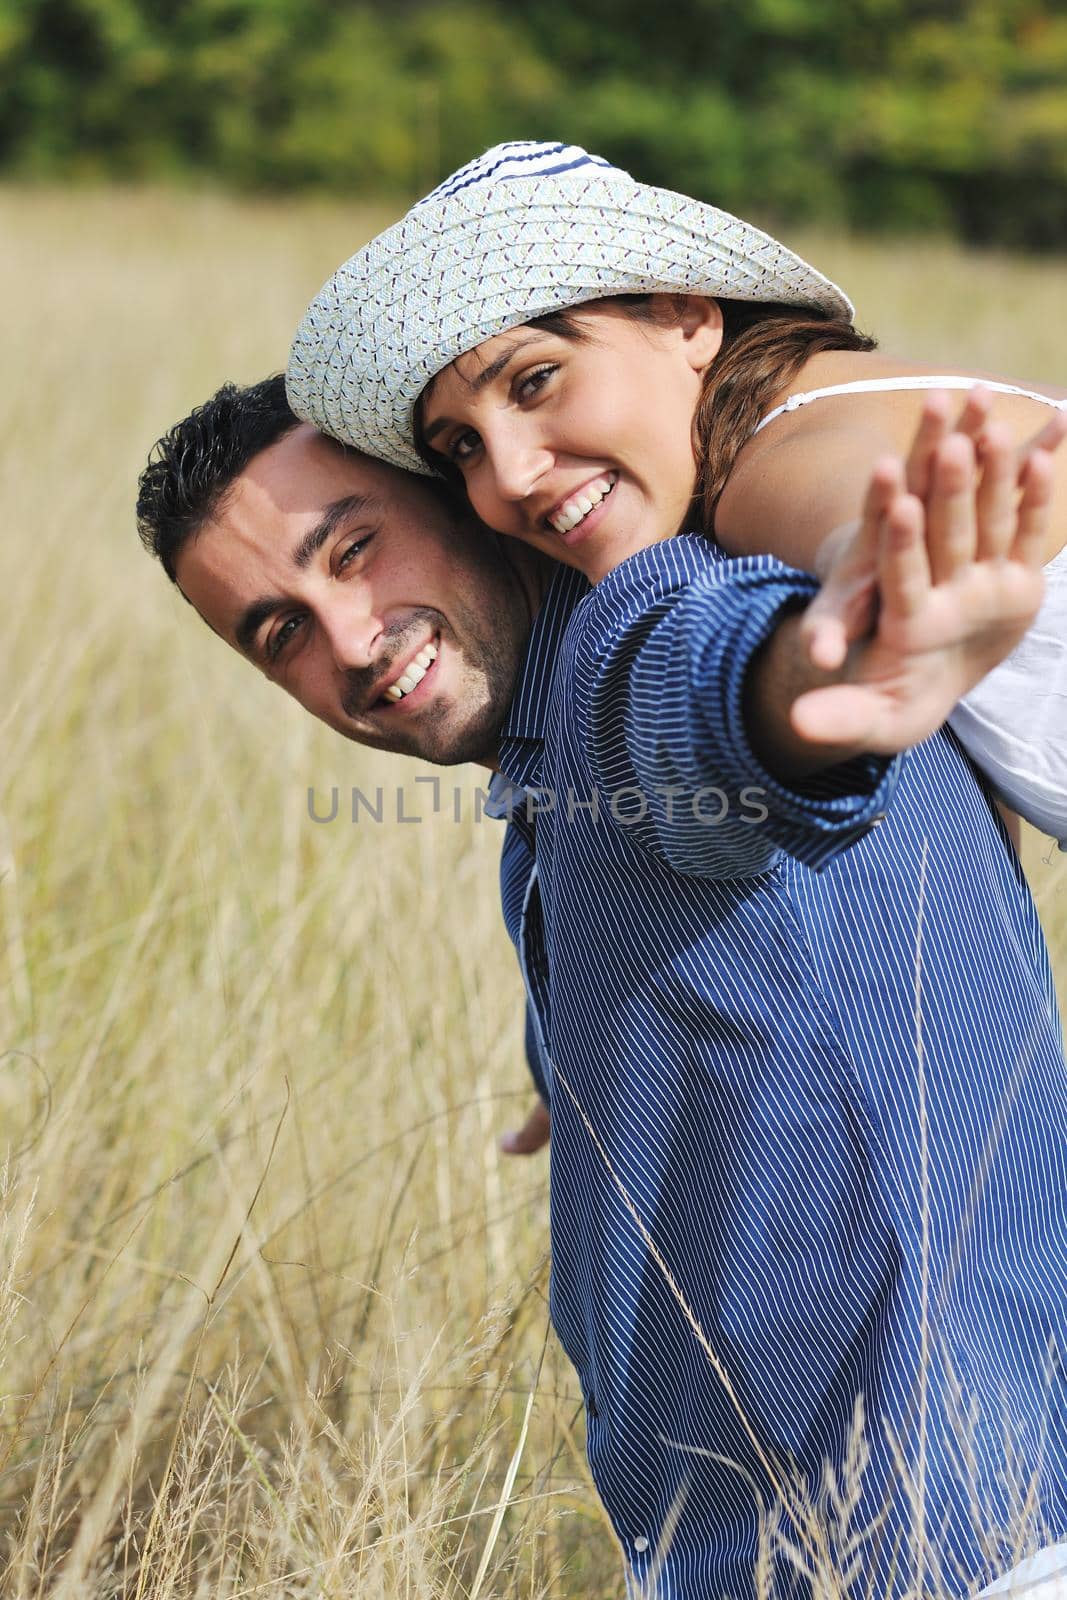 happy young couple have romantic time outdoor while smiling and hug